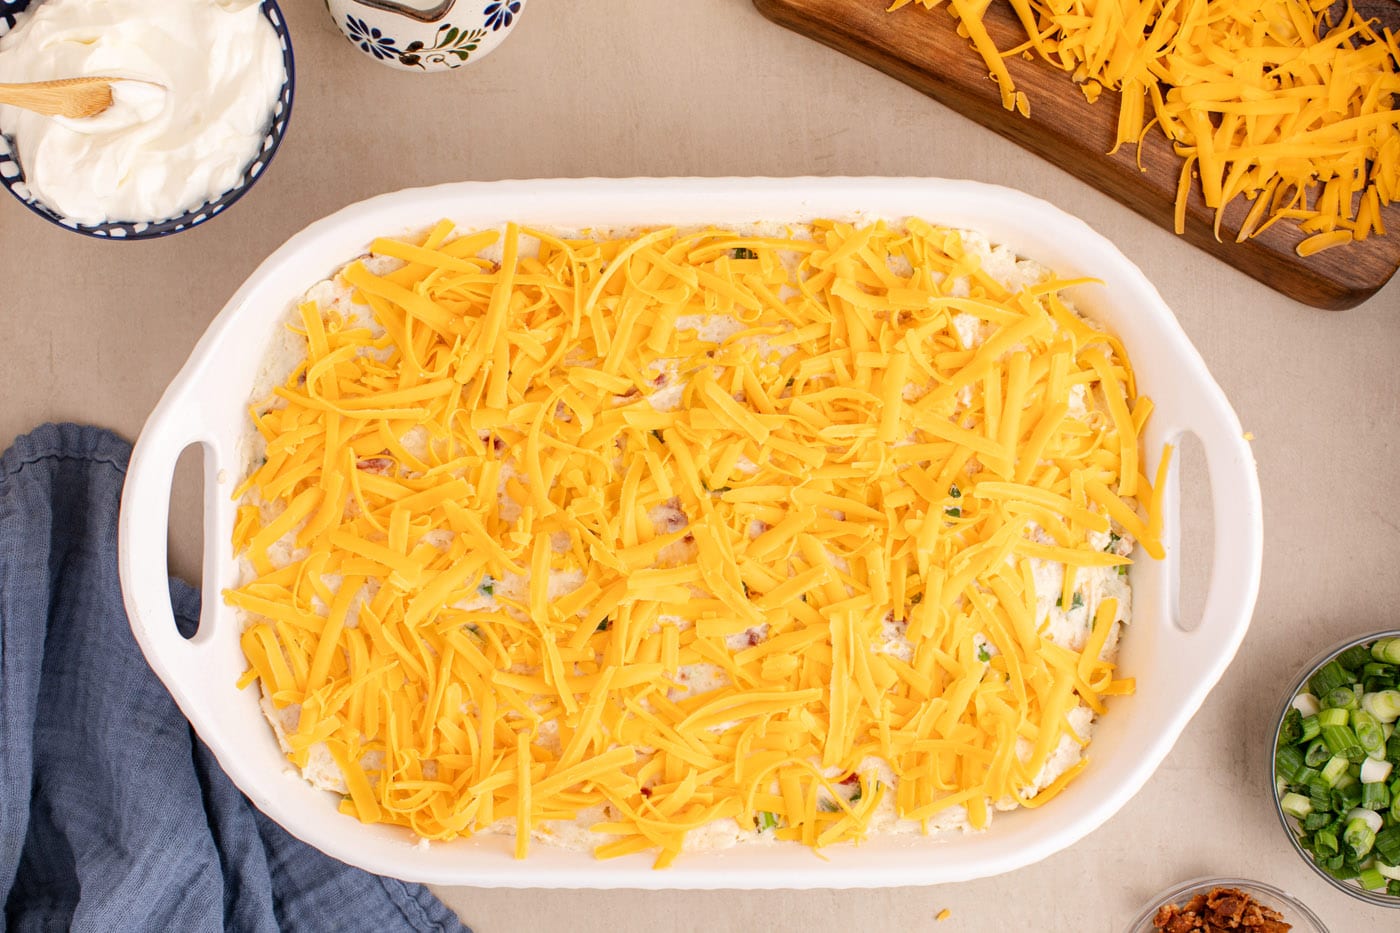 shredded cheddar cheese on top of mashed potato casserole